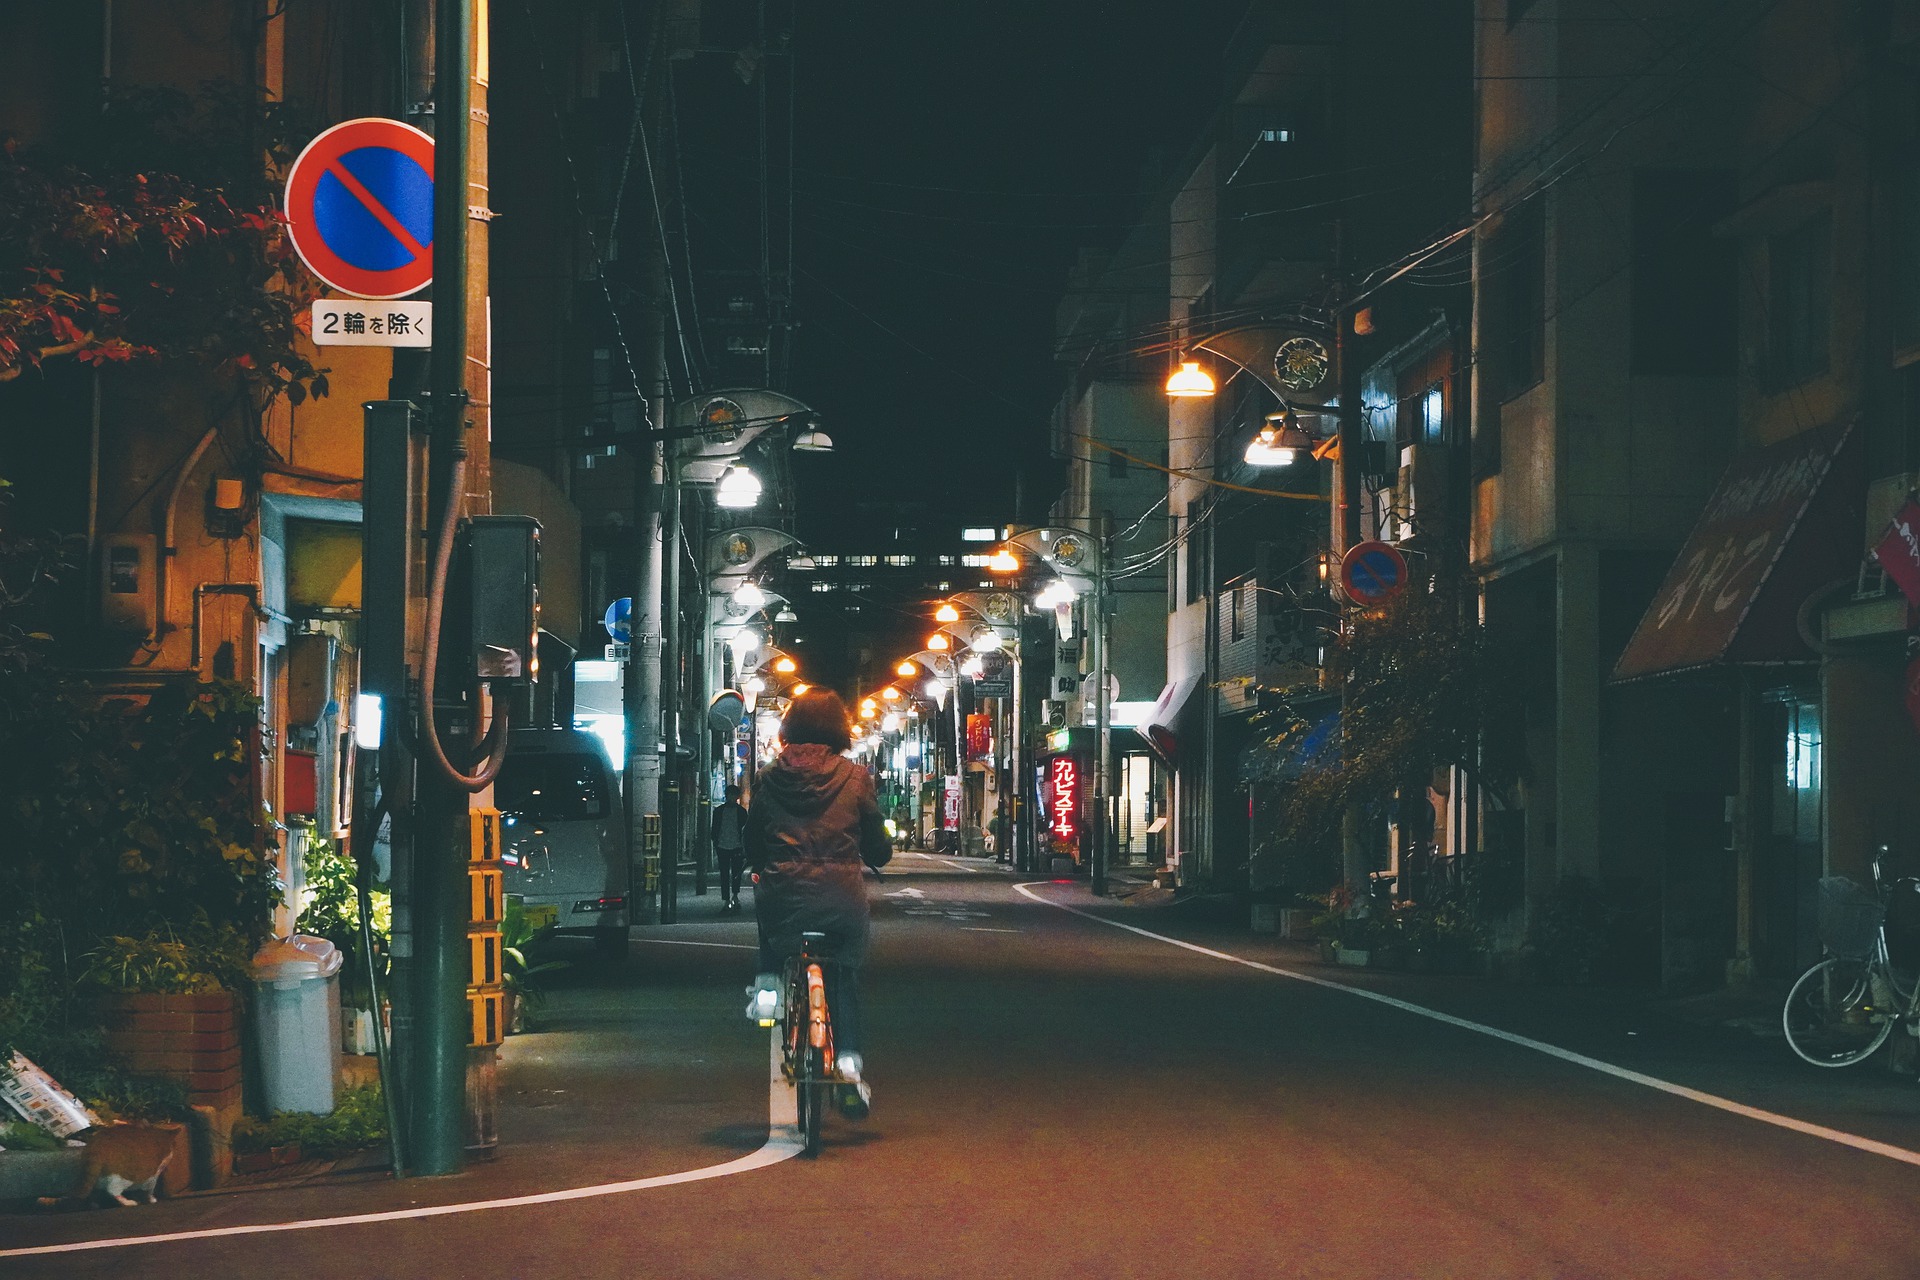 Cycling through gendered lives: exploring the link between structural gender inequalities, gender norms and mobility practices in Japan and beyond